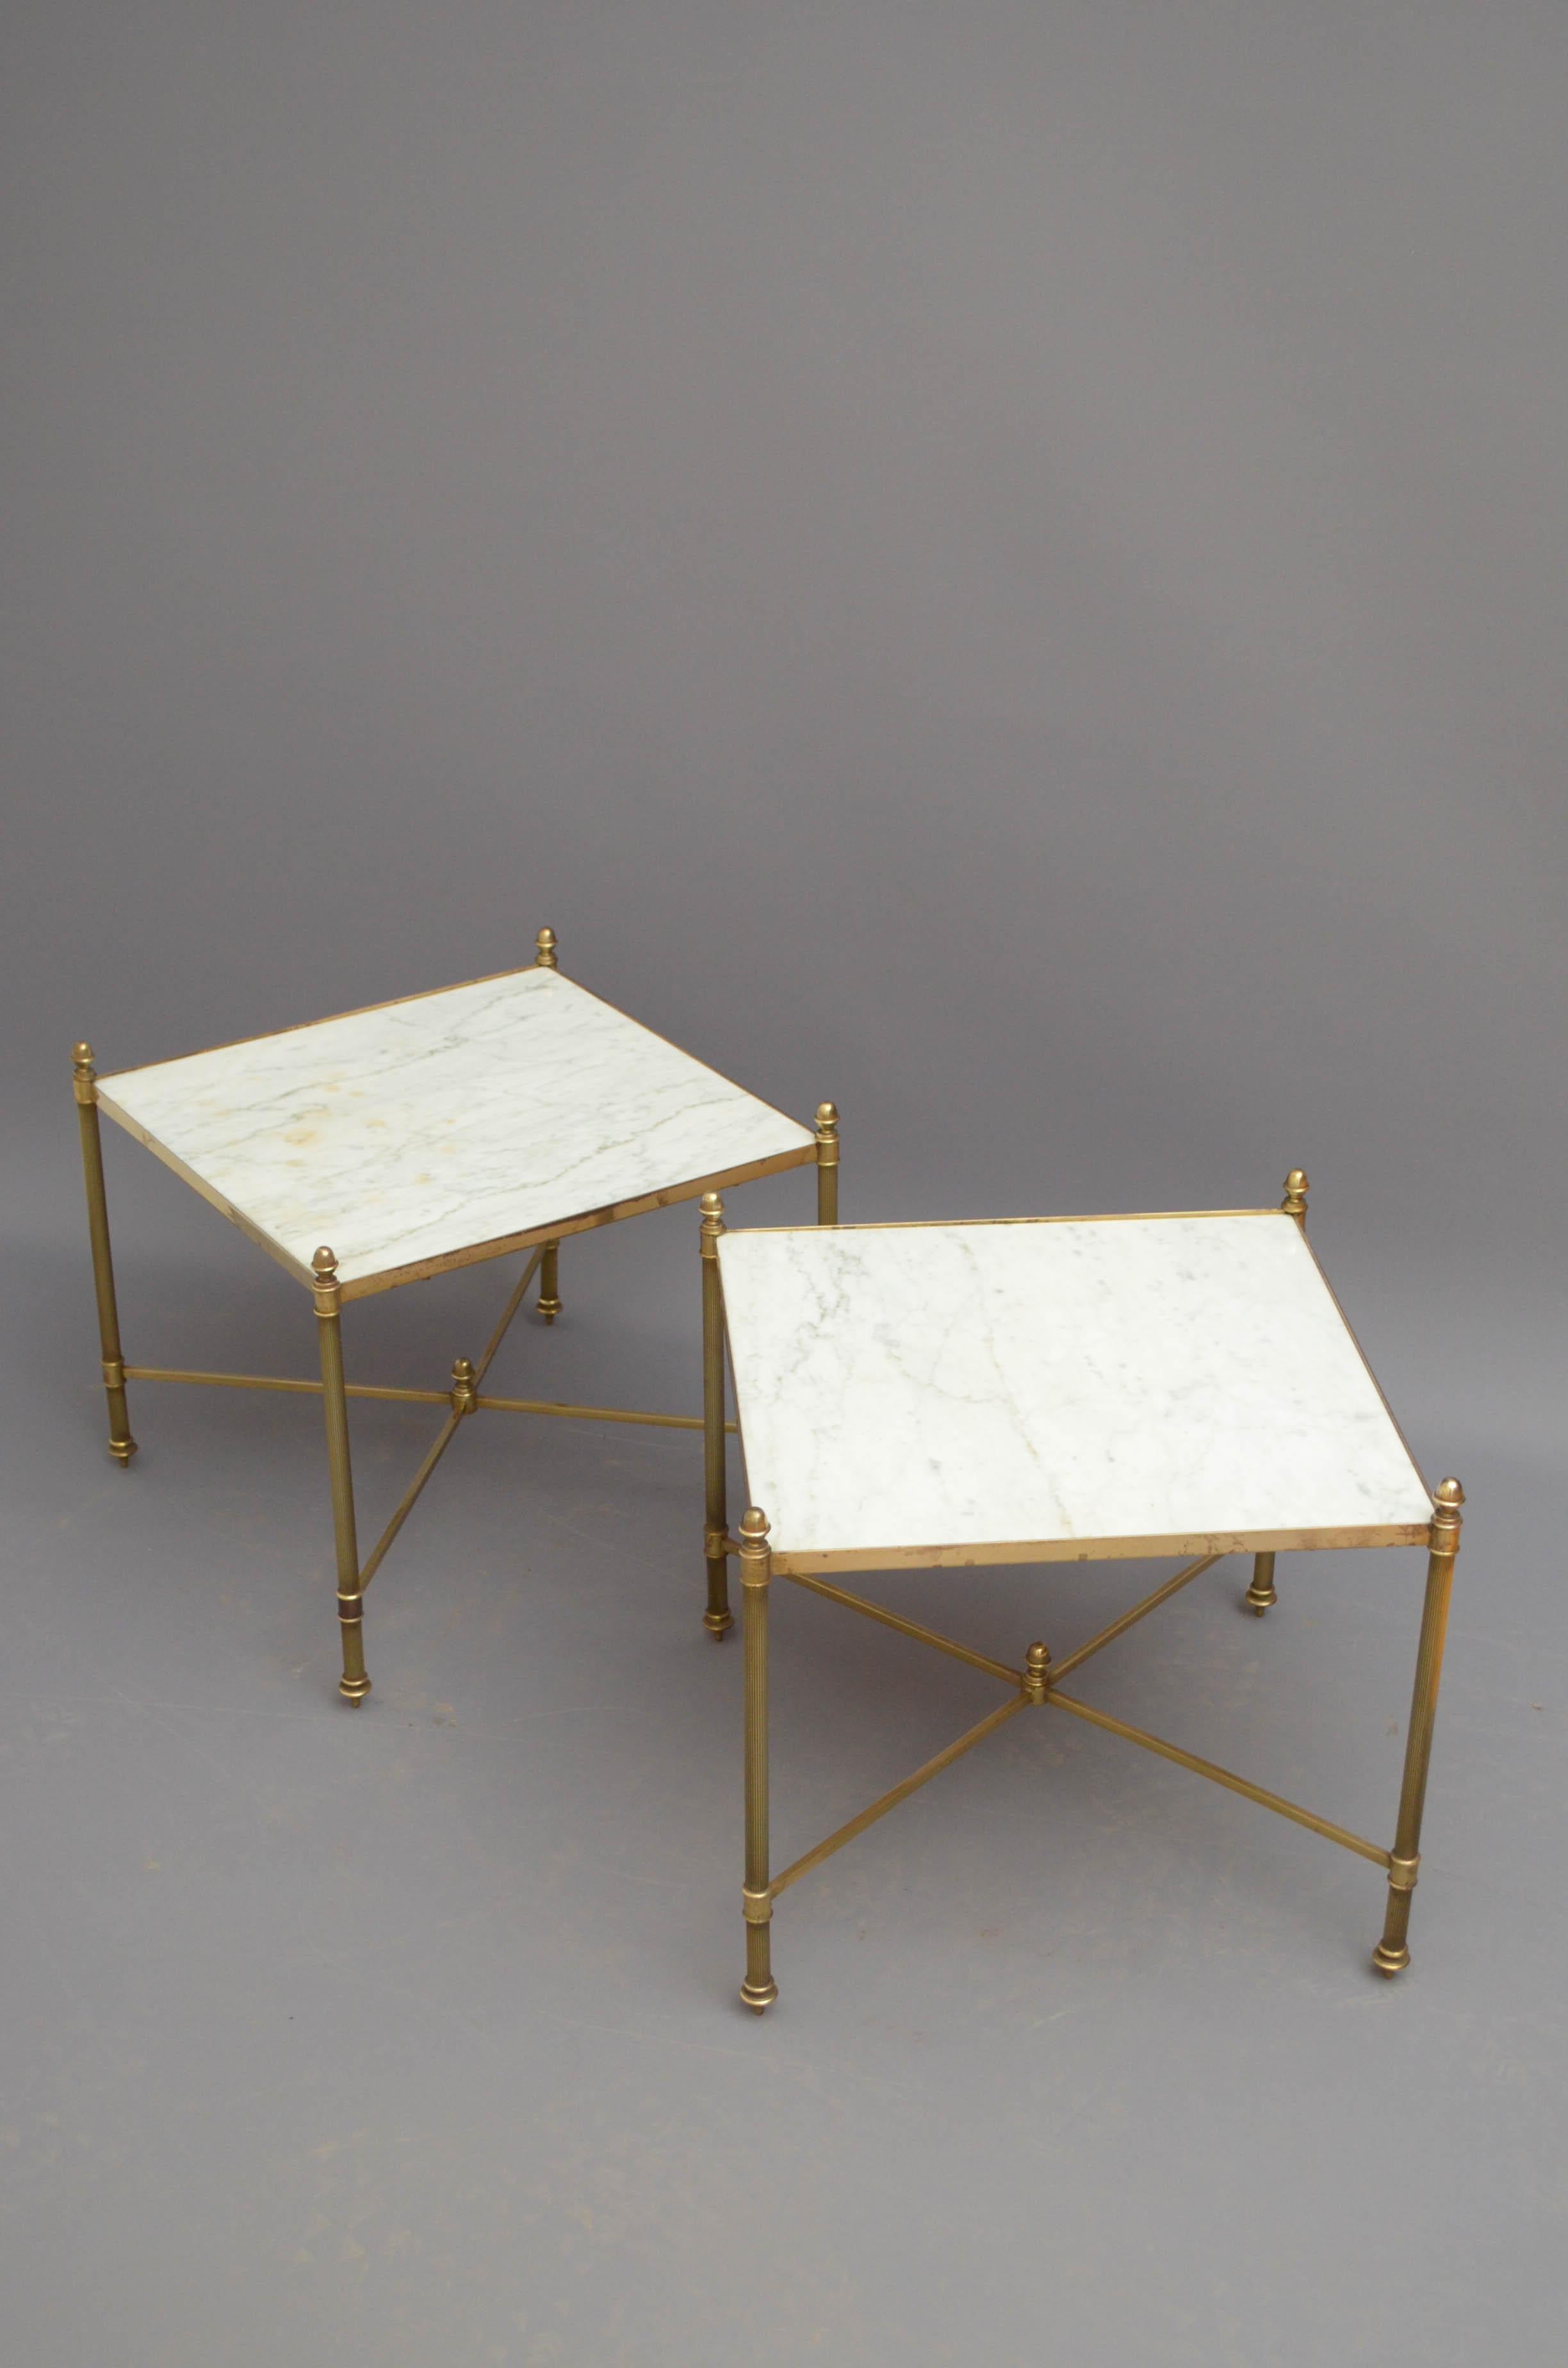 Sn5188 First half of XX century low tables, each having original veined marble top and standing on reeded legs with decorative finials, all united by X stretchers. This pair of tables is in home ready condition. XXth century.

Measures: H14.5